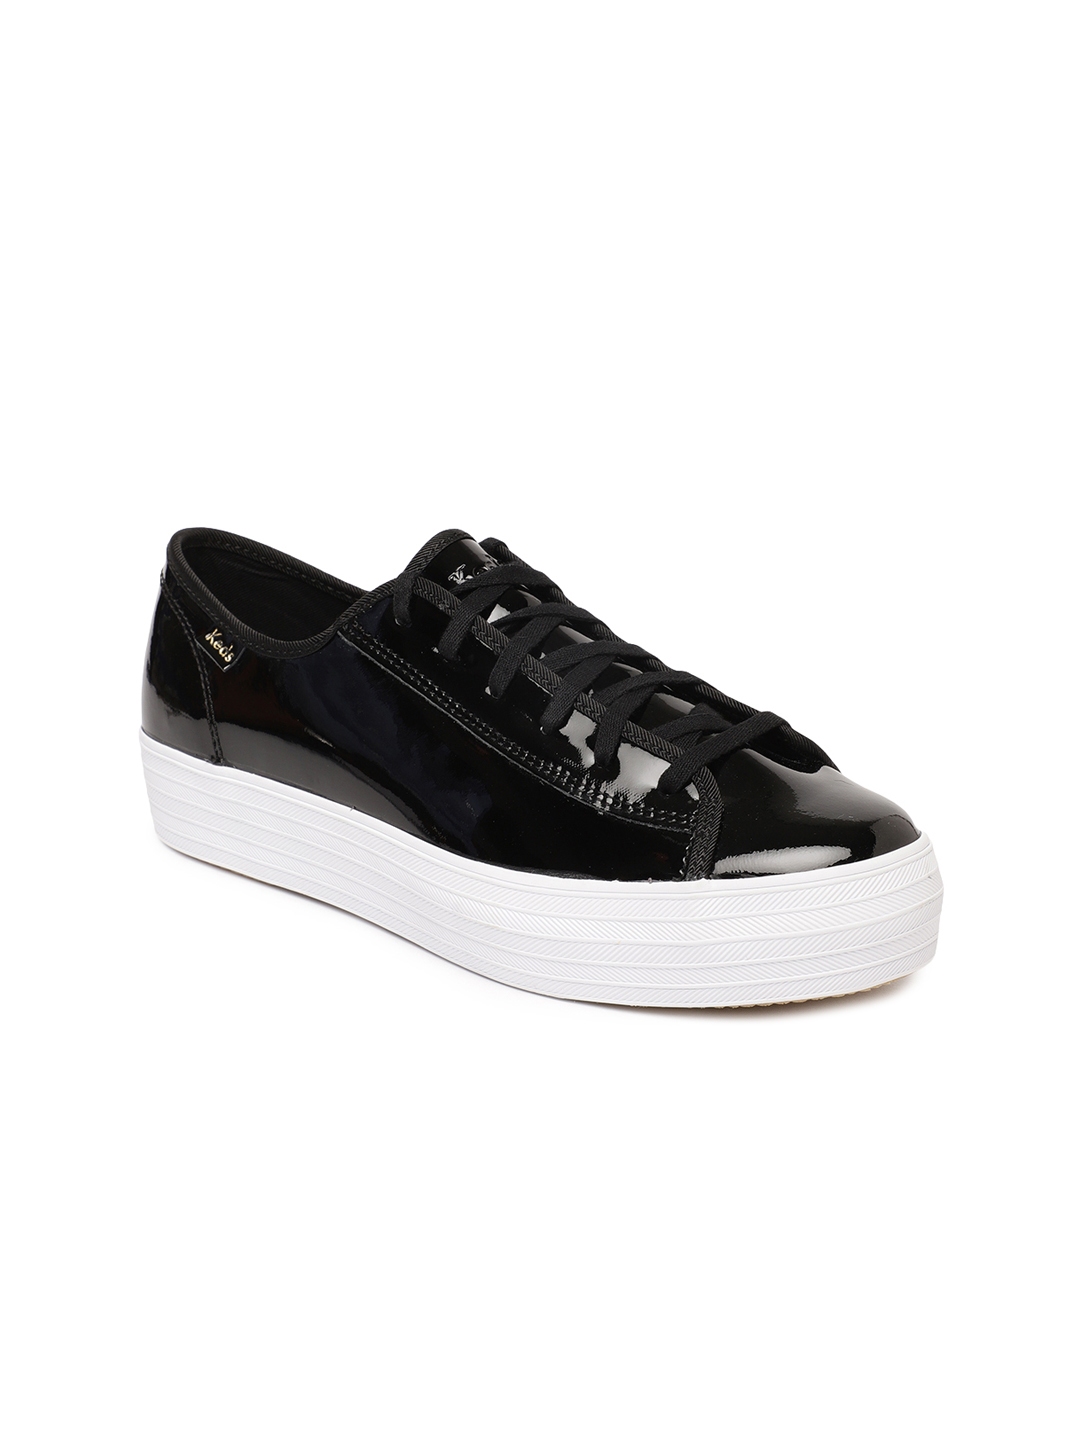 Buy Keds Women Black Patent Leather Sneakers - Casual Shoes for Women ...